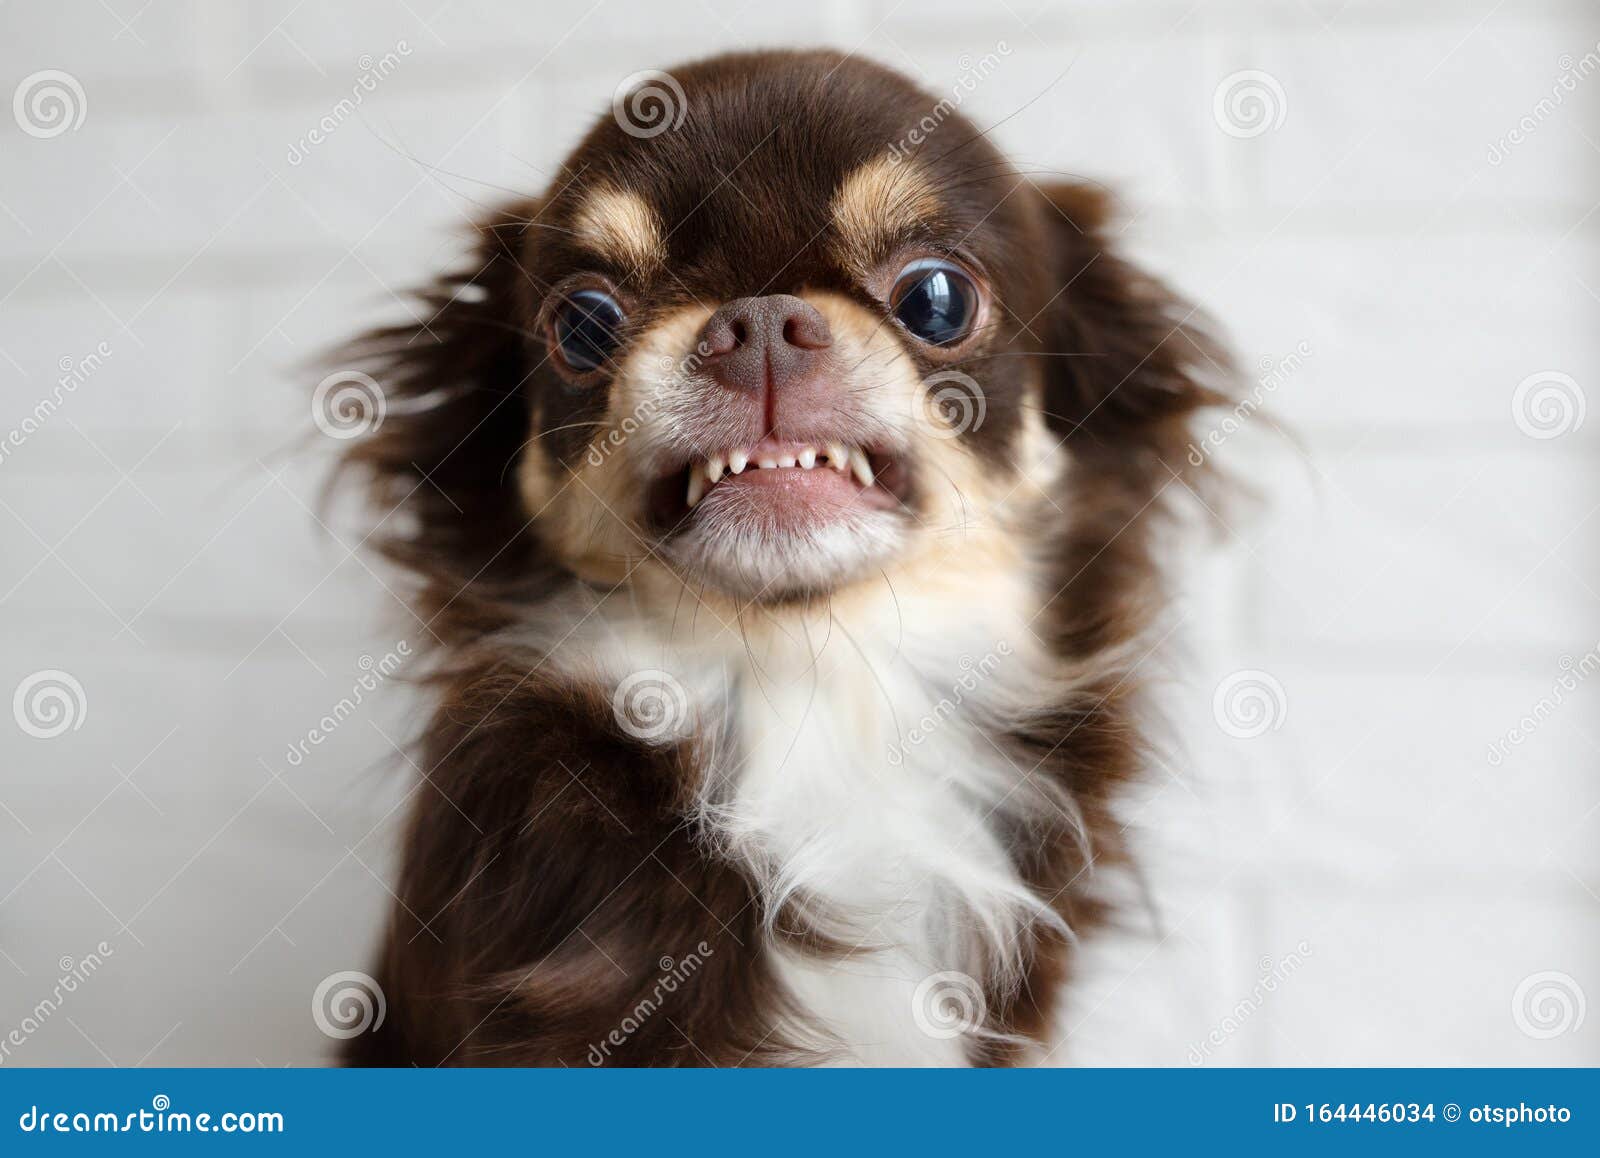 Aggressive Chihuahua Dog Snarling And Looking Angry Stock Photo Image Of Furious Brown 164446034